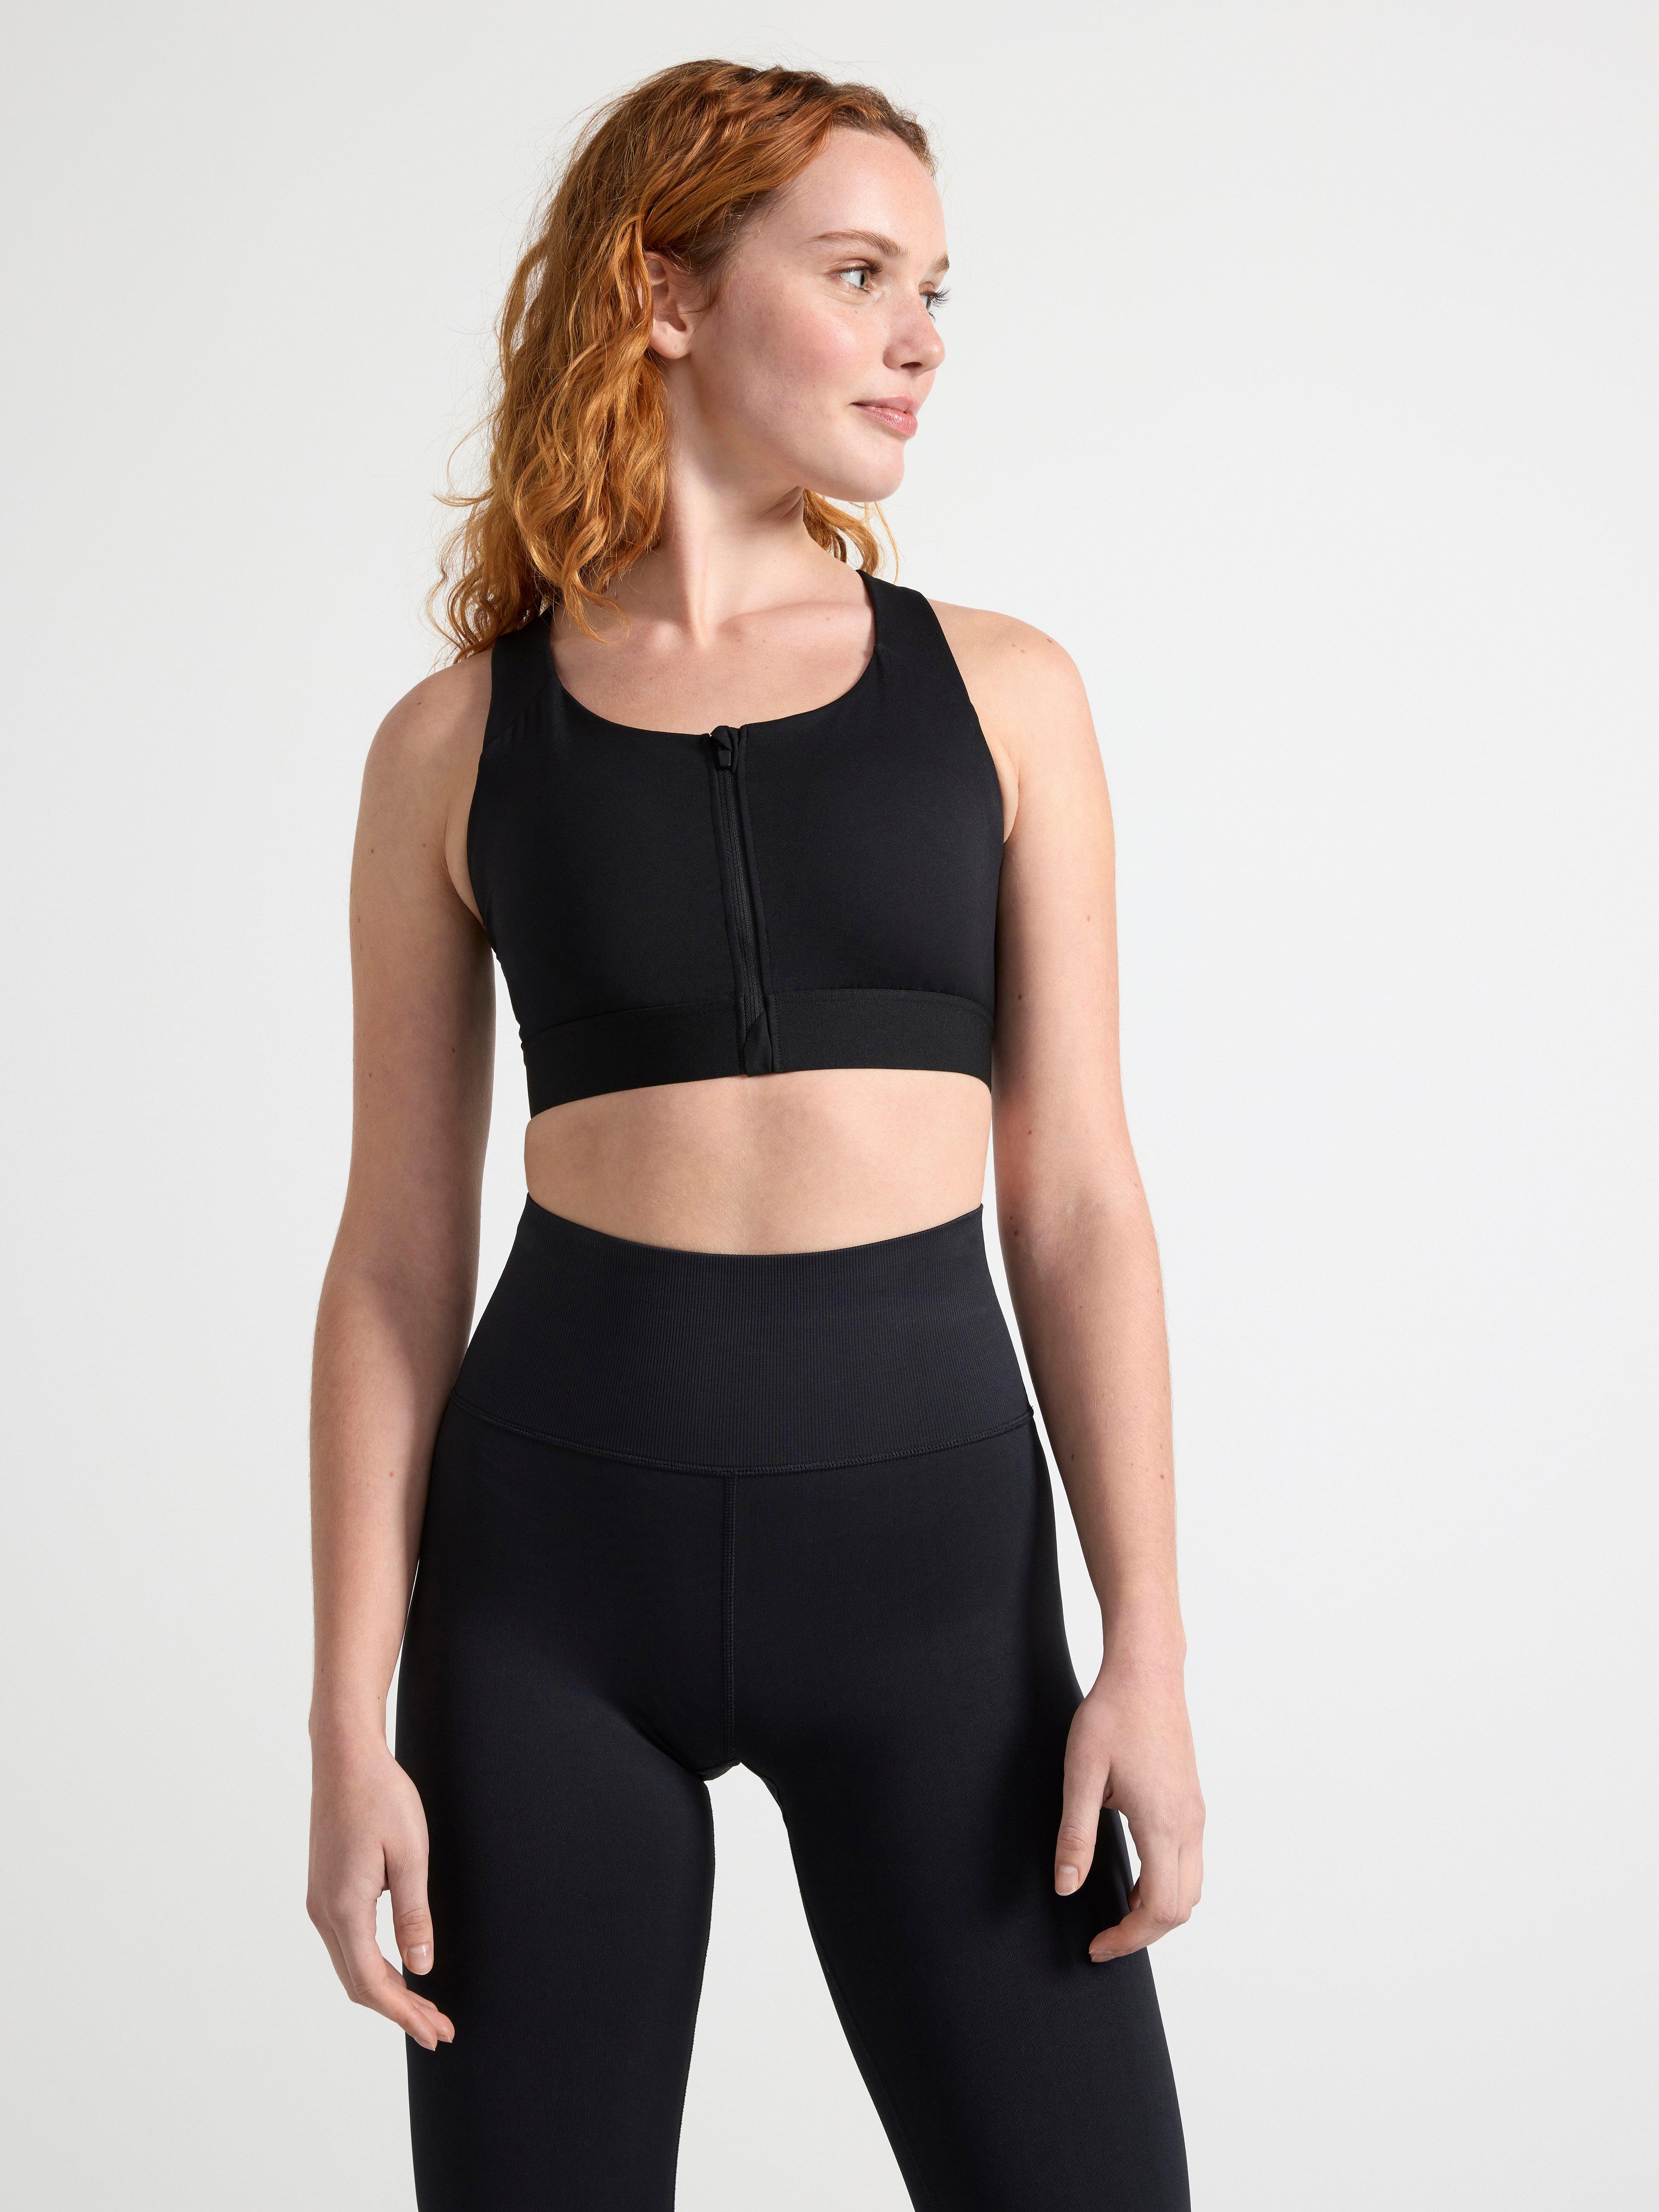 The Hug sports leggings – Closely